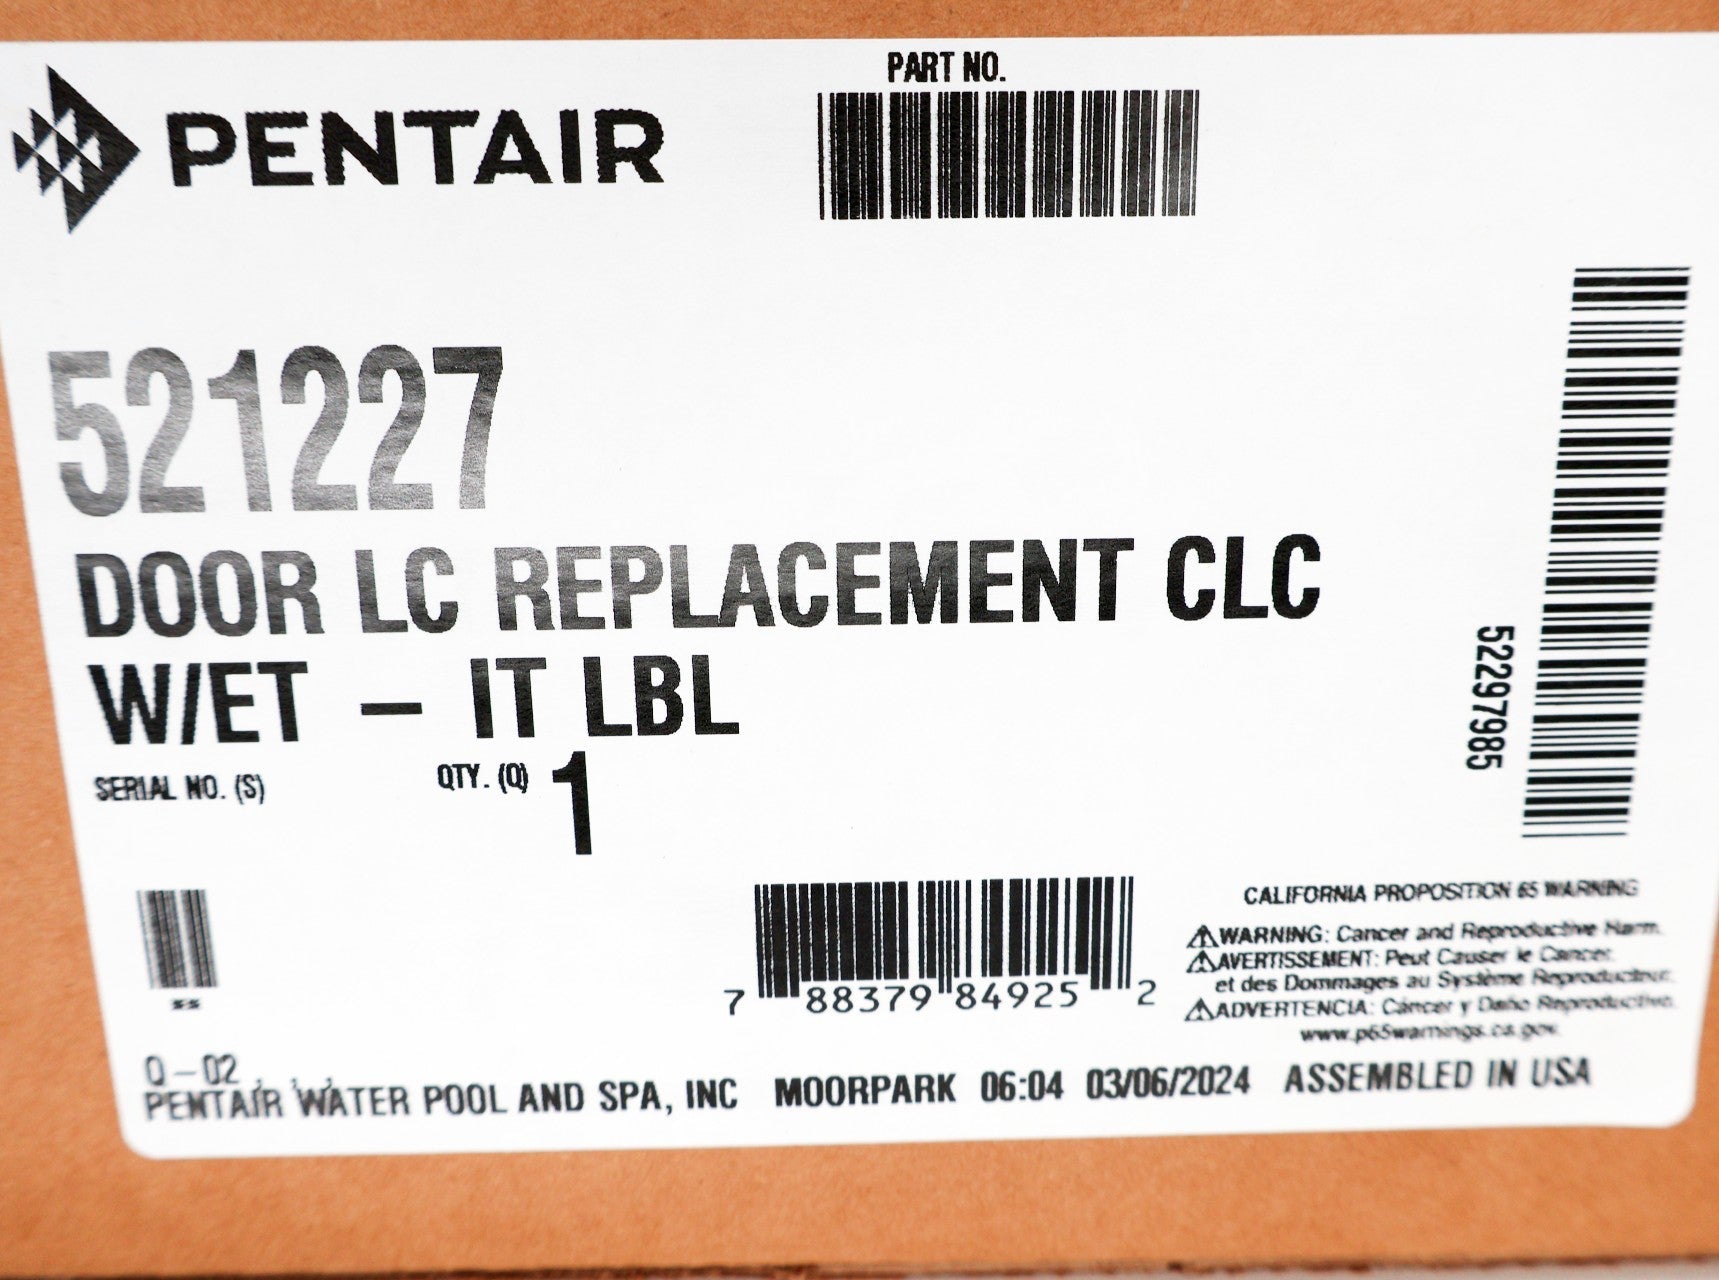 Pentair Replacement Load Center Door for IntelliTouch Automation 521227 - Pool Automation - img-3